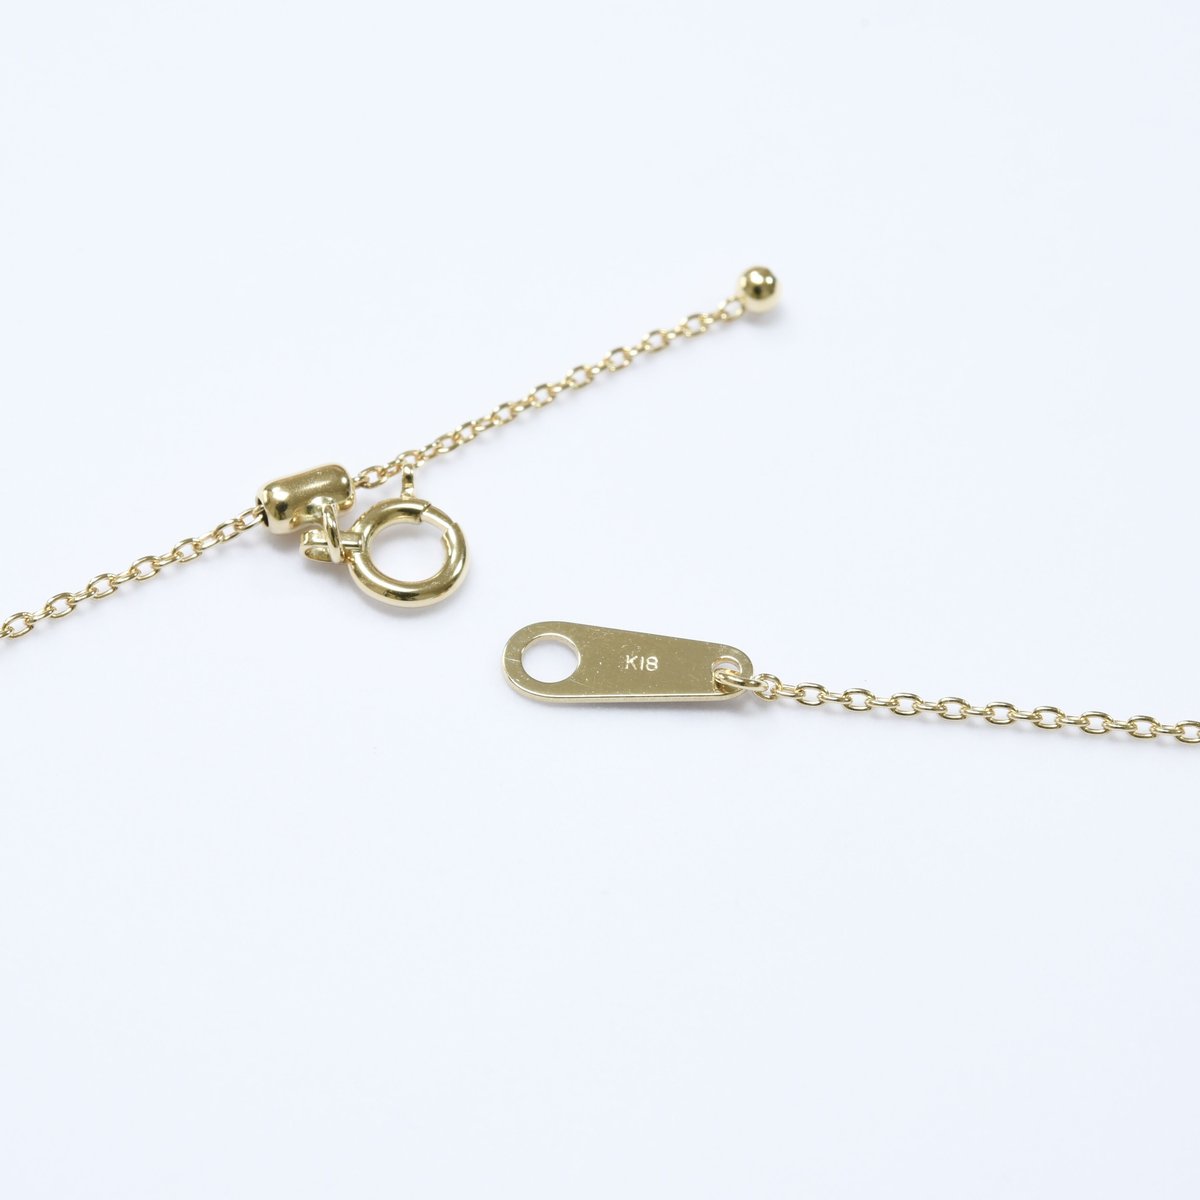 K18 Yellow Gold Slide Chain Necklace 45cm